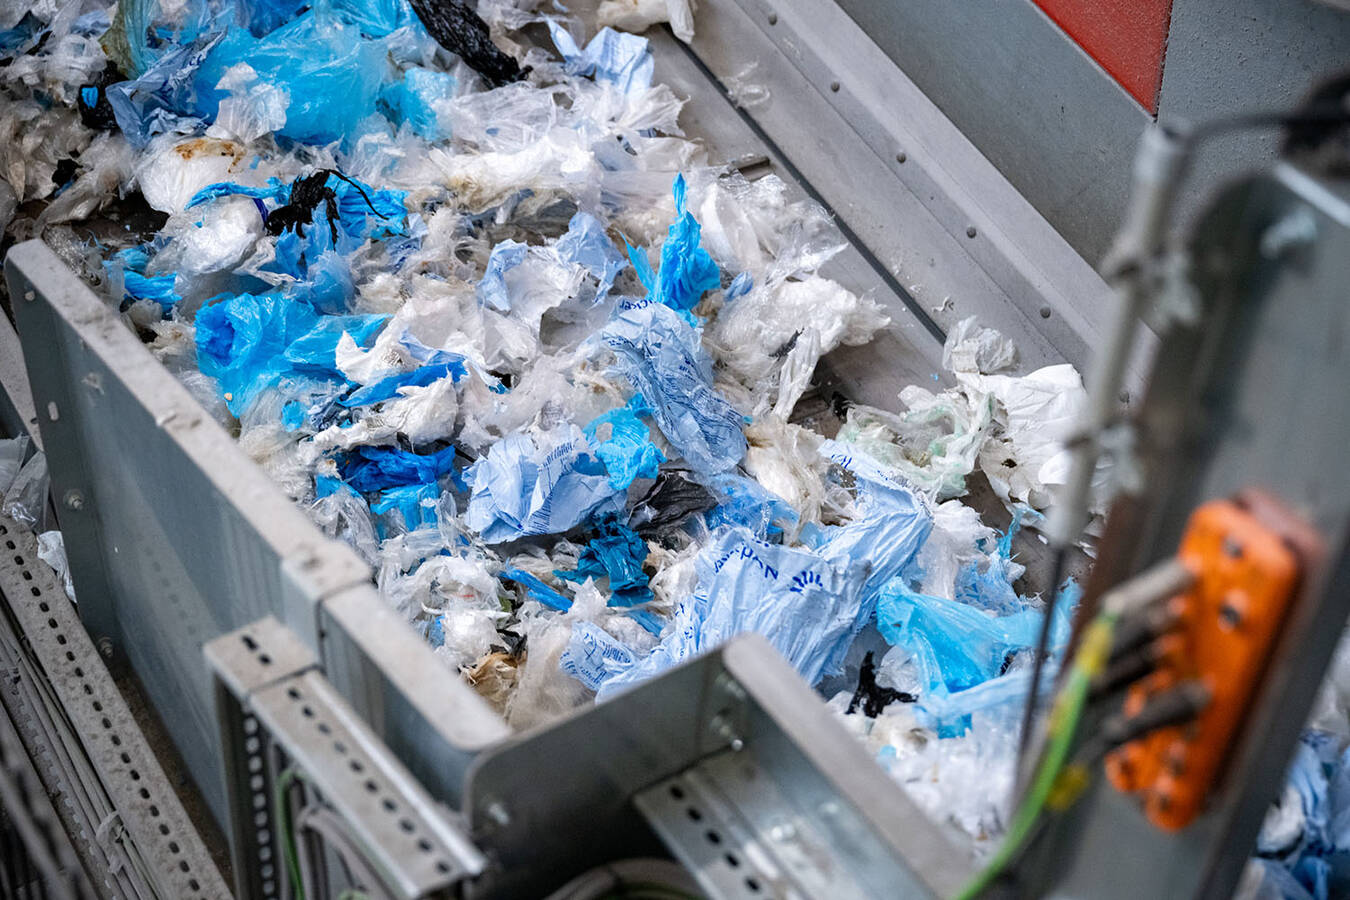 Optimum particle size for NIR sorting. After the bale opening, the films are shredded to an exact size of A4/A3. This enables downstream NIR systems to optimally recognise materials and sort them more efficiently.